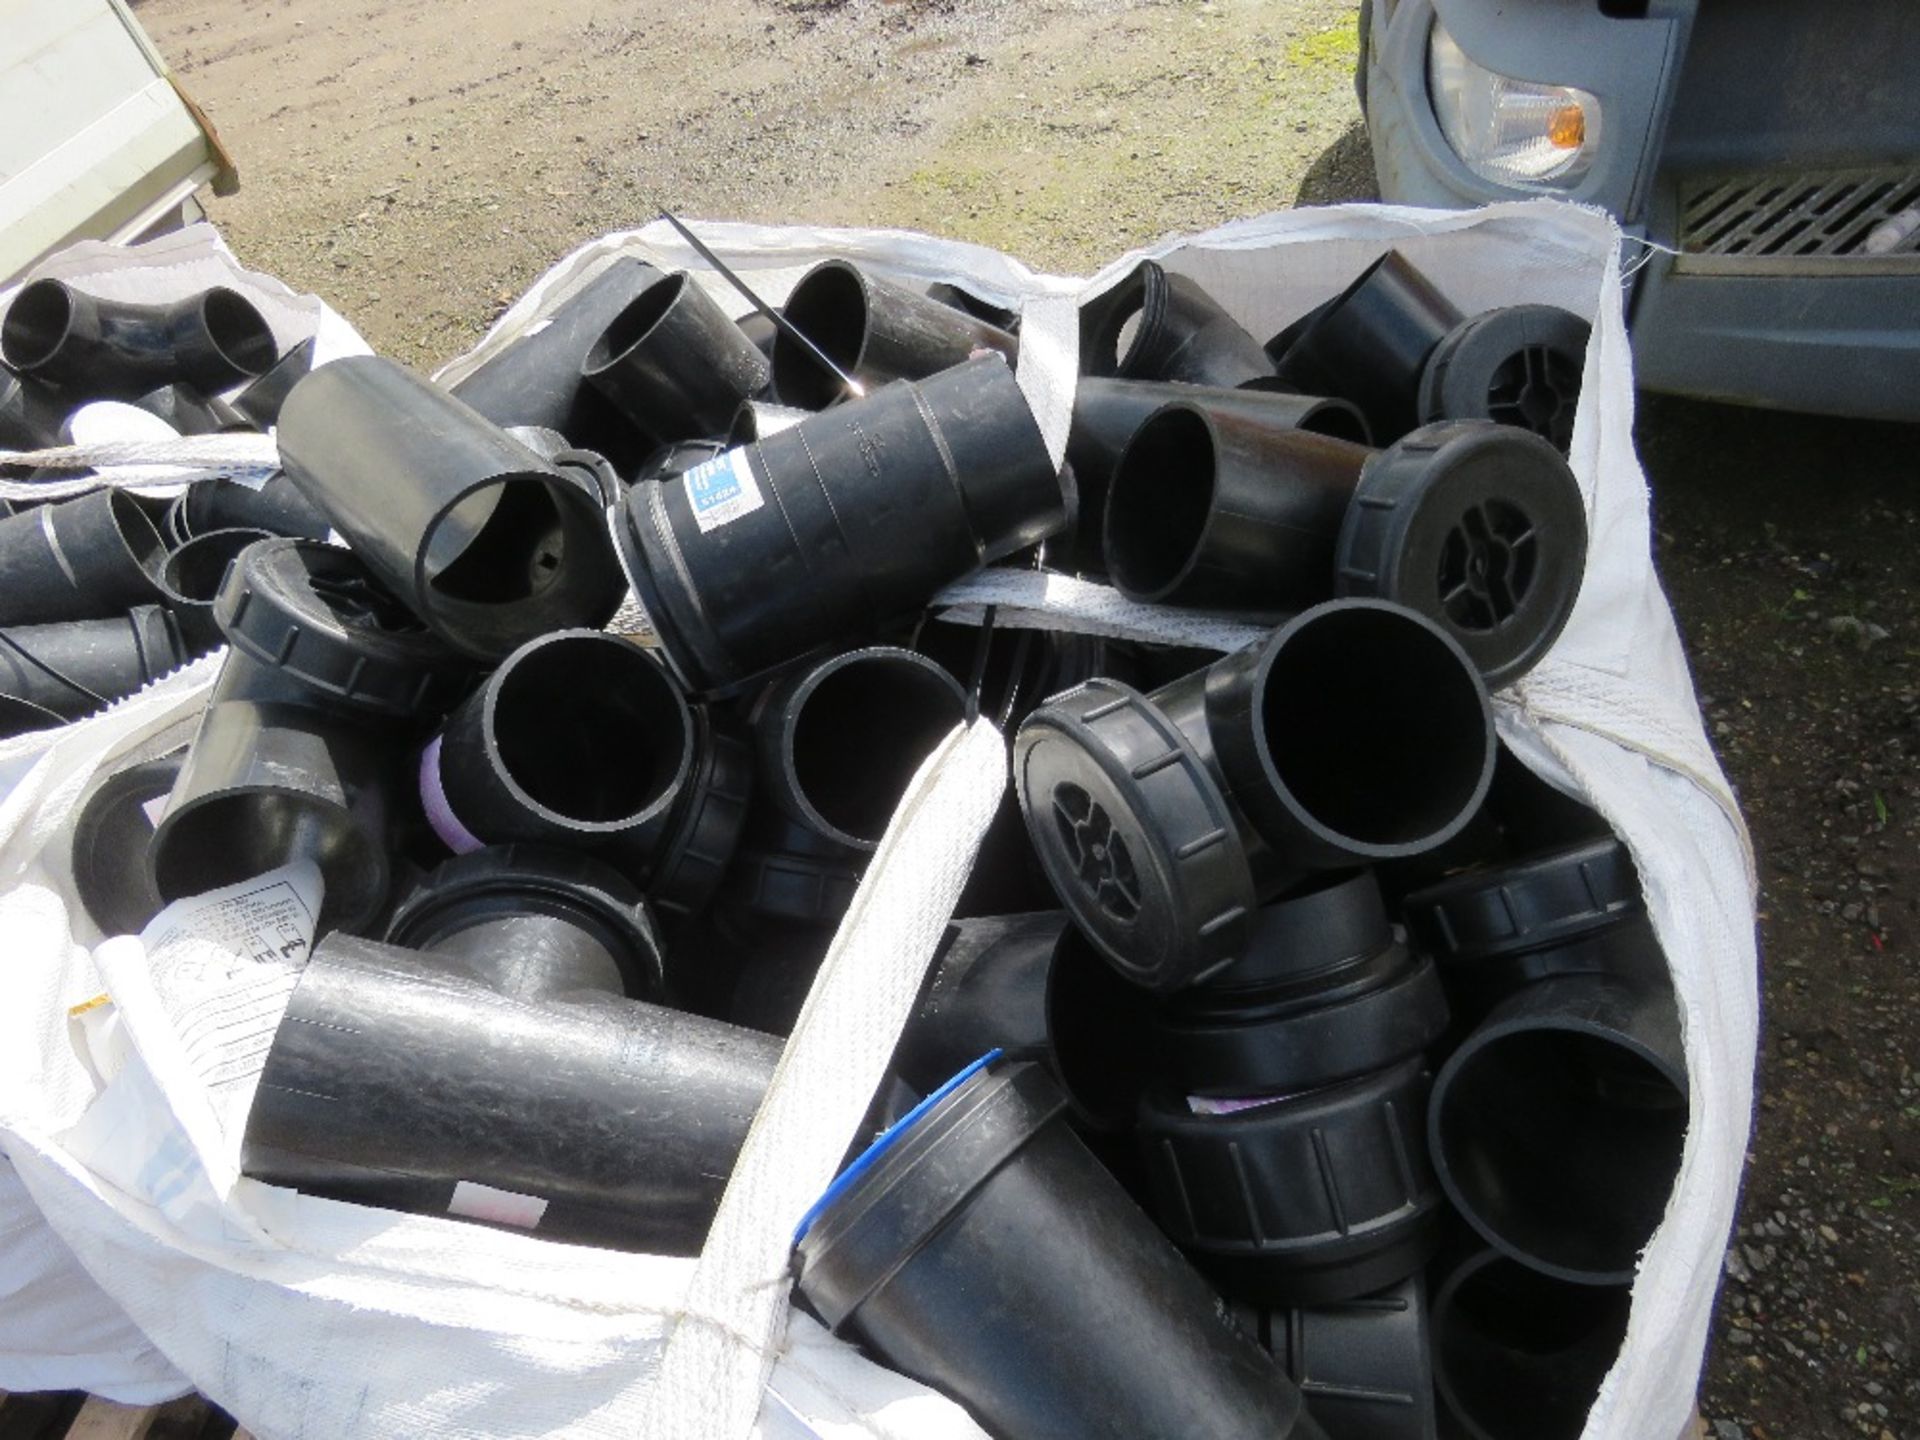 2 X BULK BAGS CONTAINING PLASTIC PIPE JOINTS AND FITTINGS. - Image 2 of 5